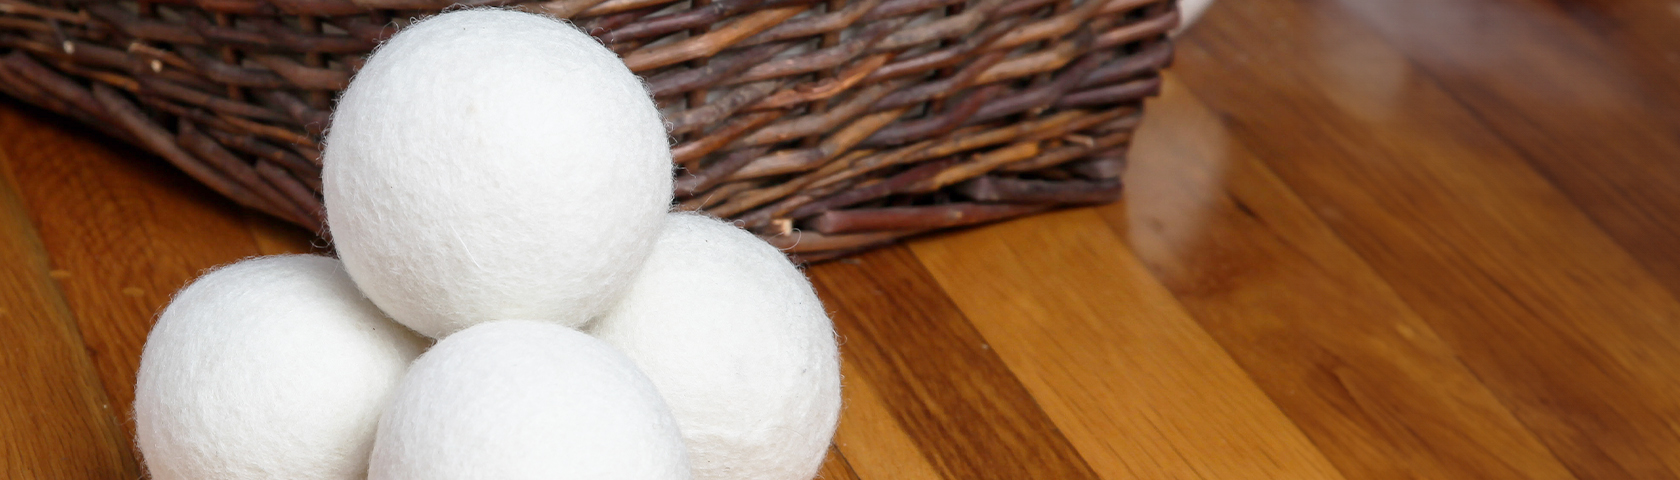 Natural Fabric Softener Ideas That Won’t Harm Your Machine